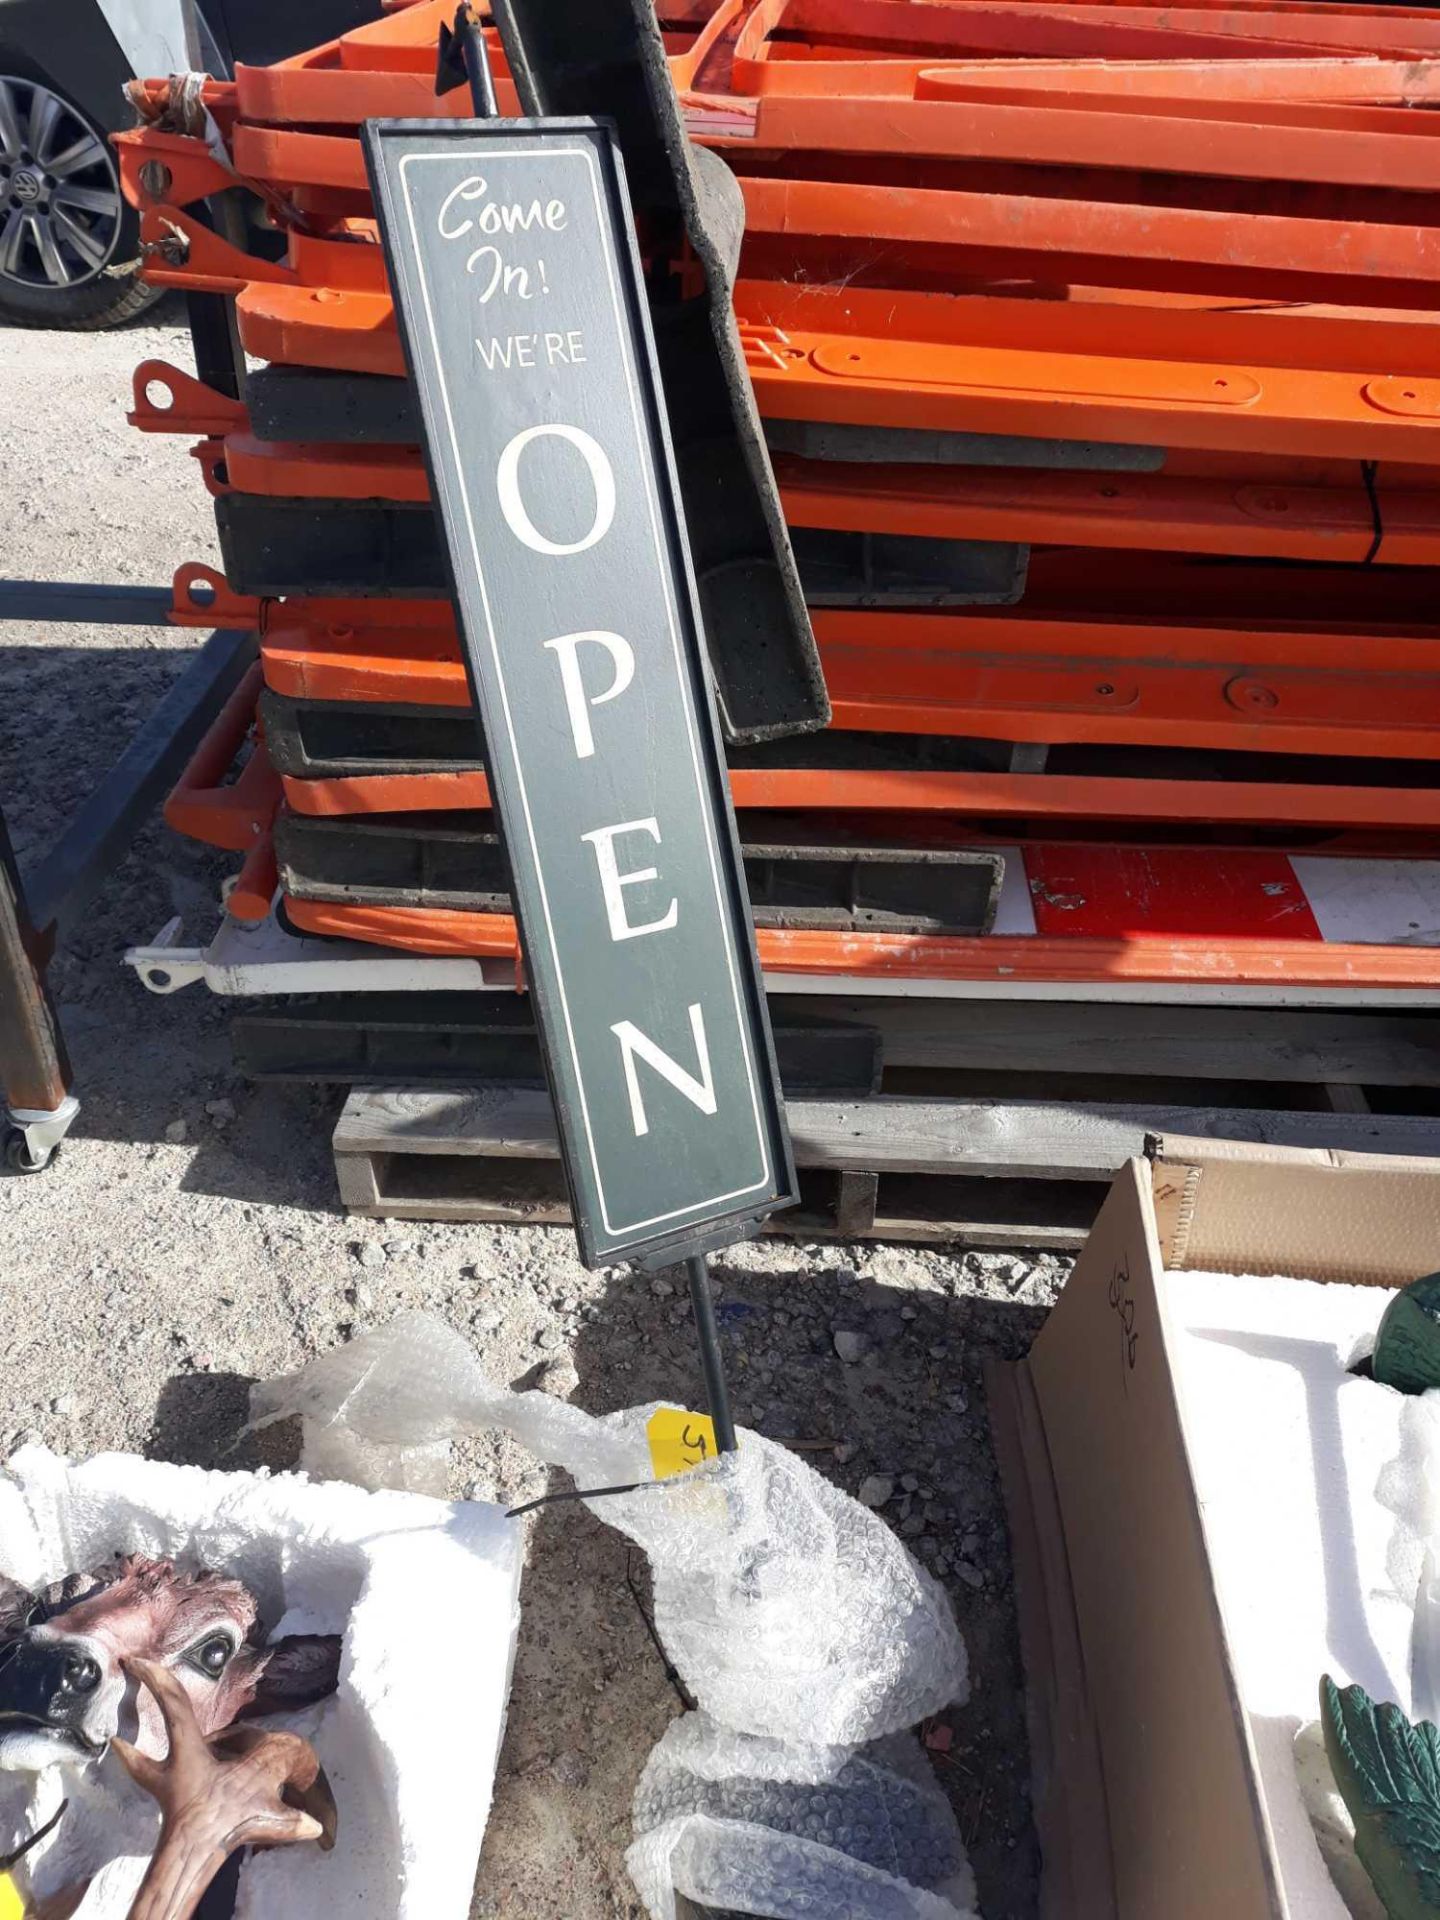 OPEN/CLOSED SIGN